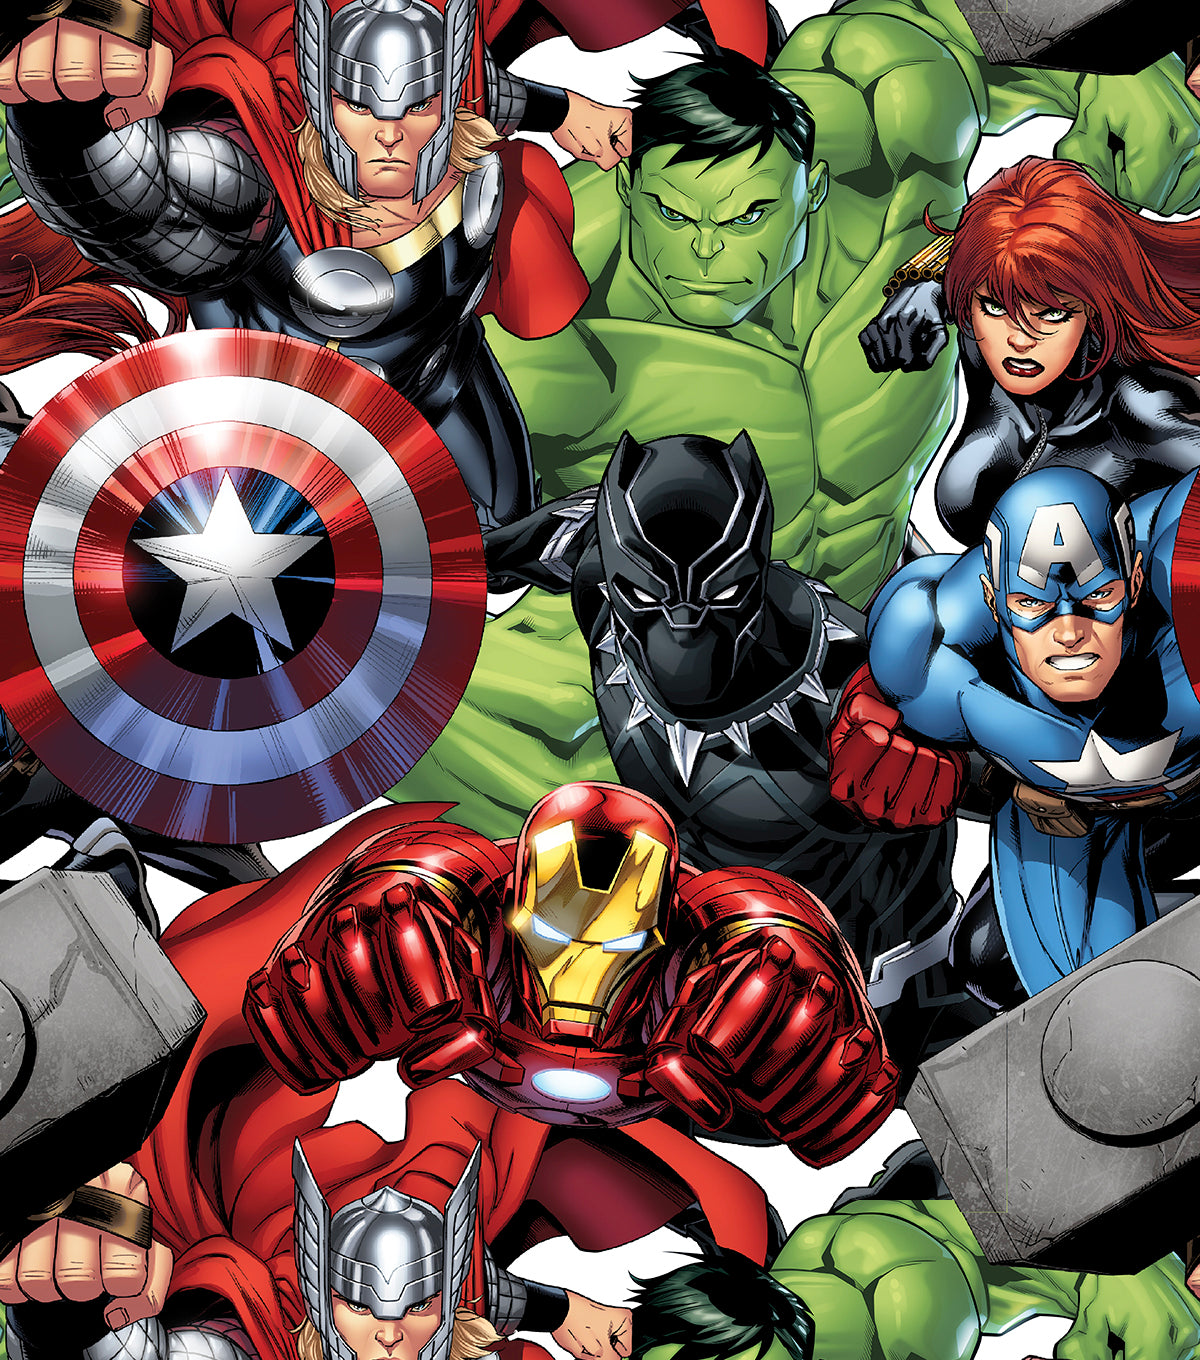 Marvel's Avengers We Are One